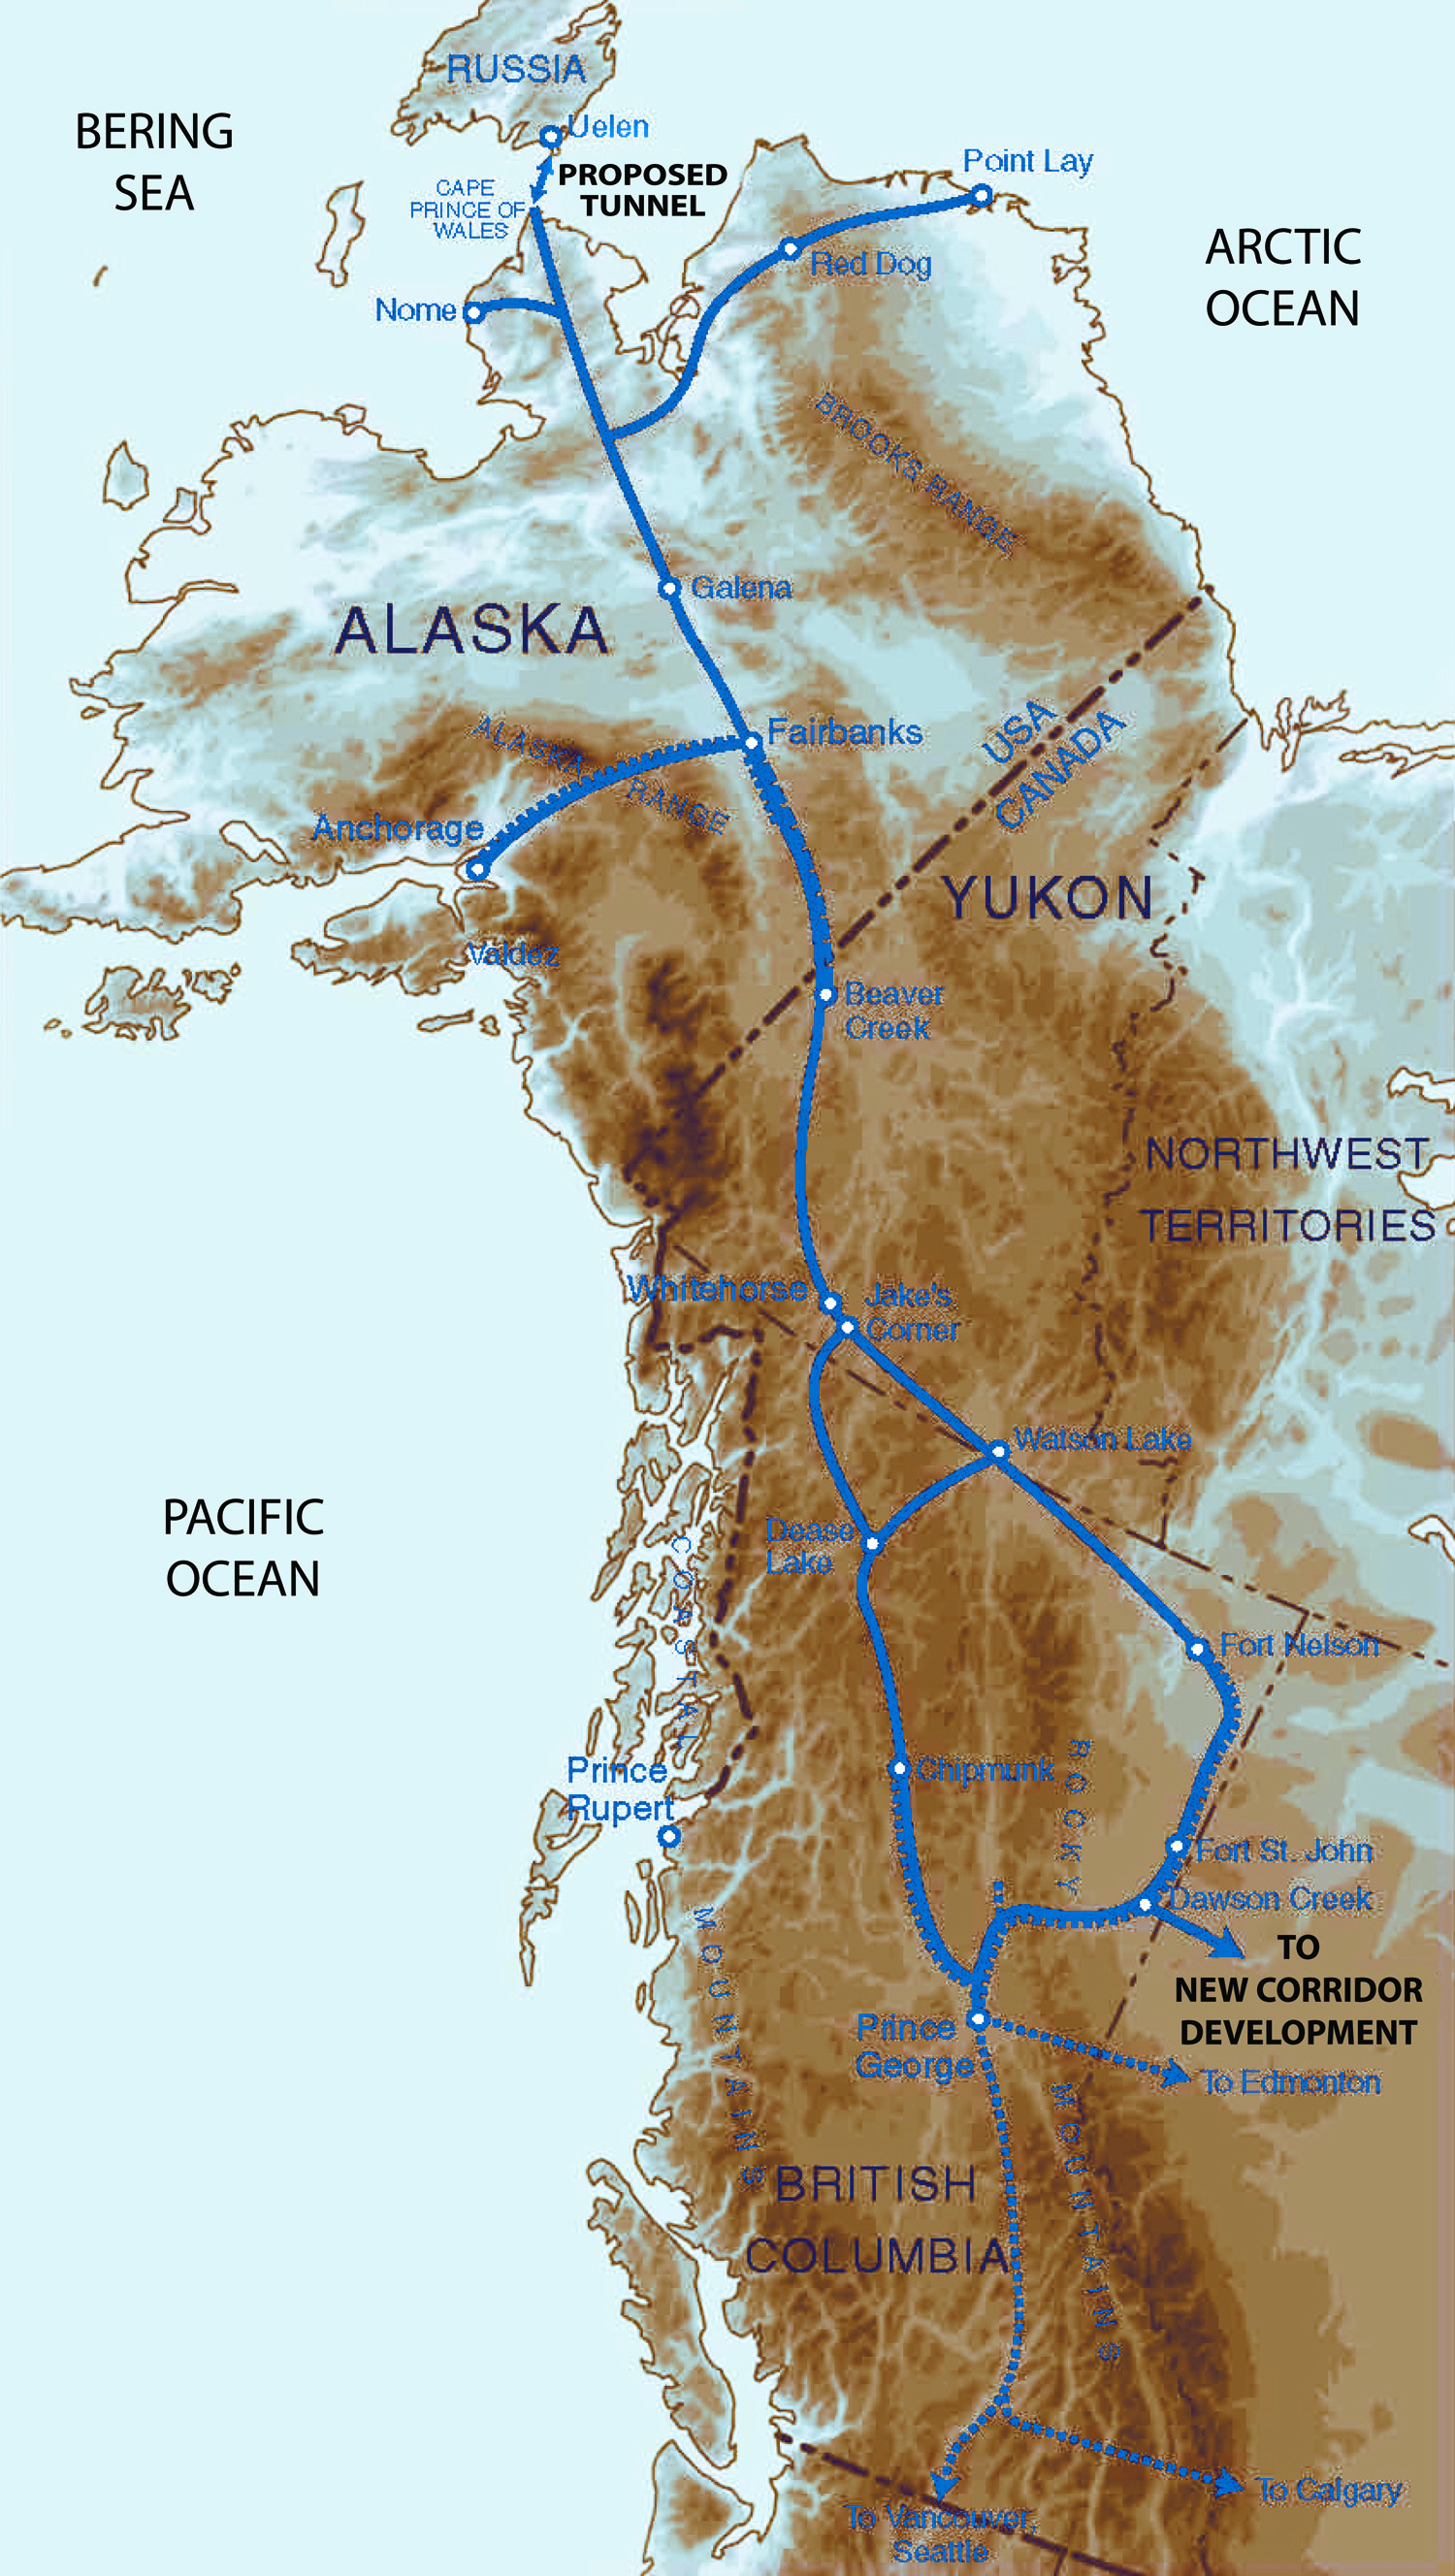 Proposed railroad lines in Canada and Alaska toward Bering Strait tunnel.